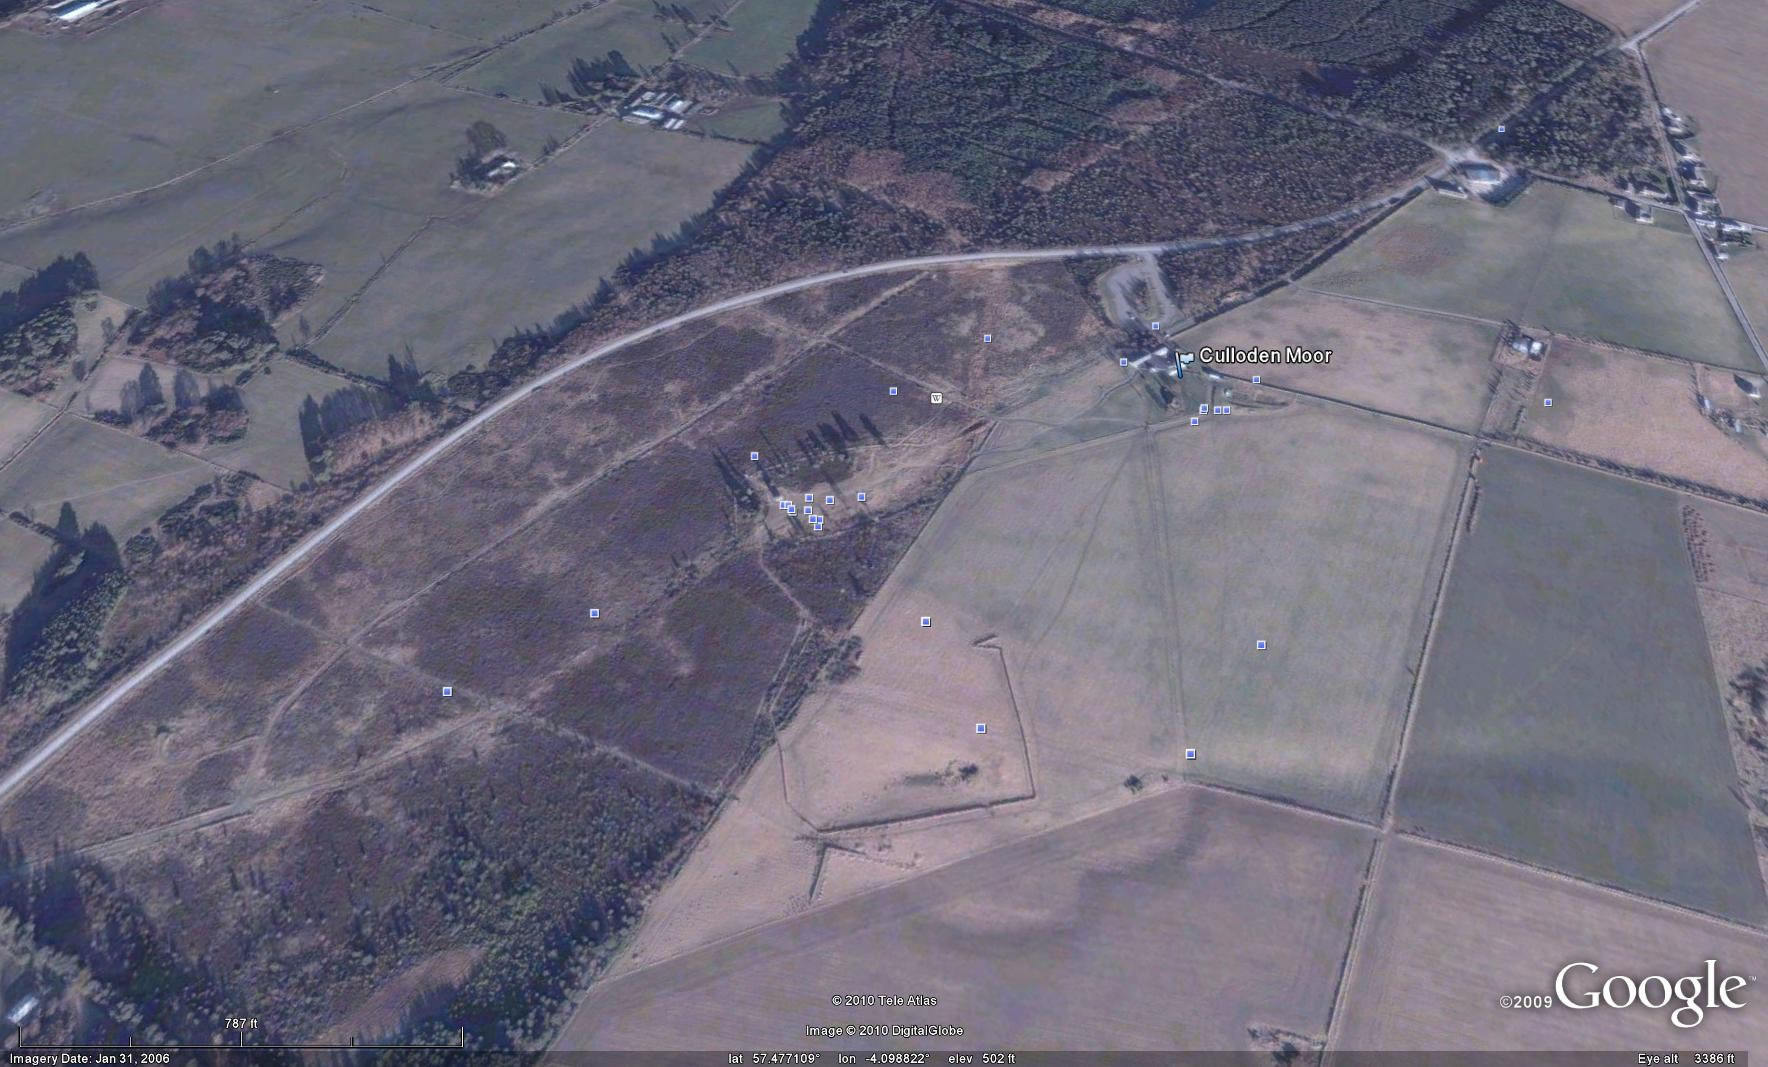 Google Earth view of Culloden Moor